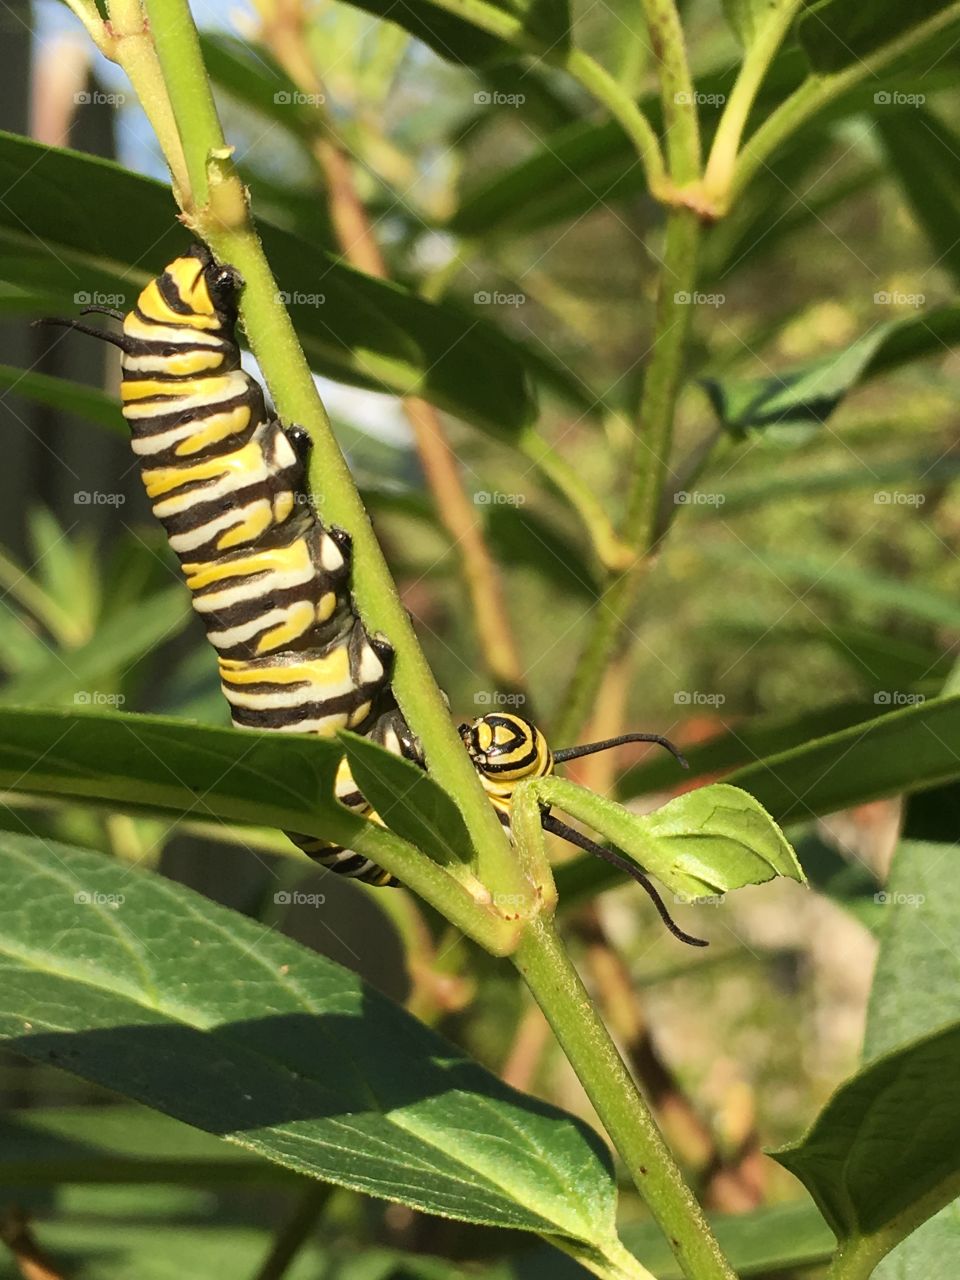 Monarch Caterpillar chowing down on milkweed